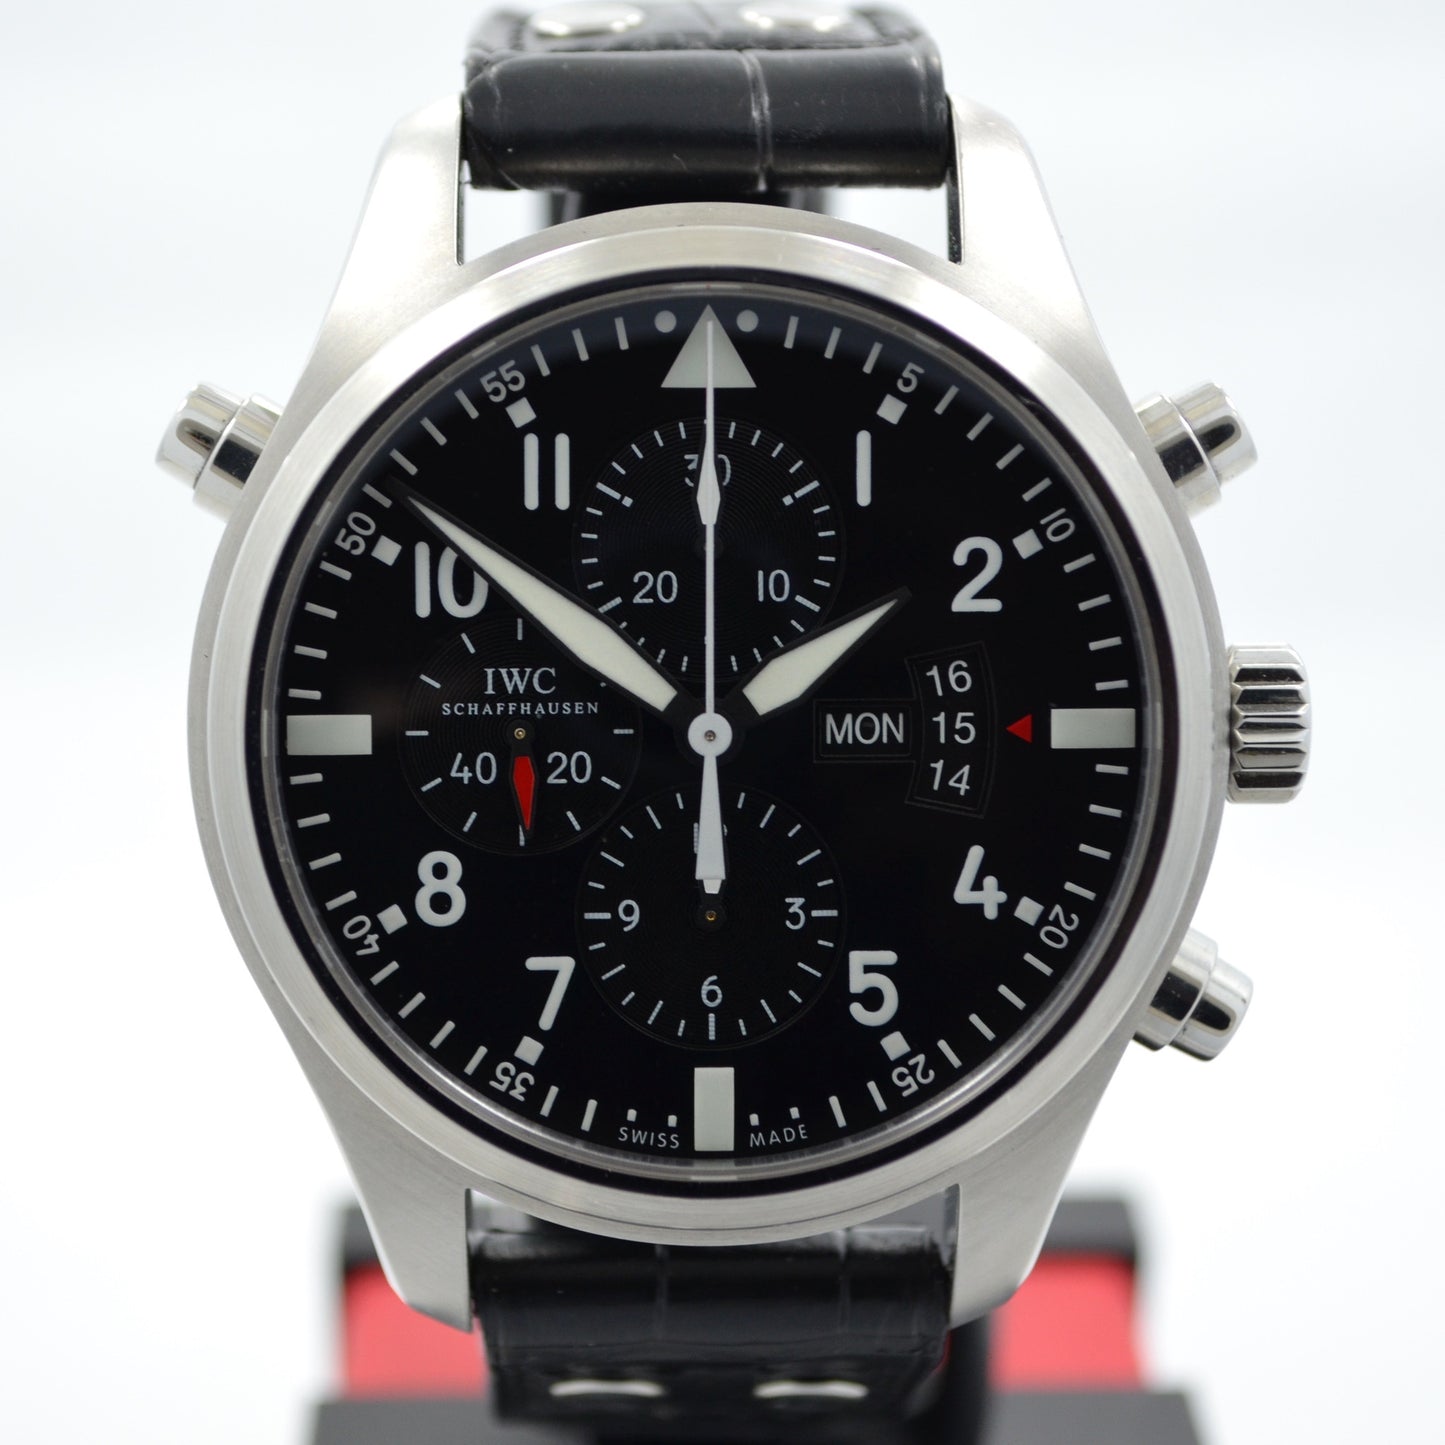 IWC Pilots Double Chronograph IW377801 Stainless Steel Black Dial 46mm Watch - Hashtag Watch Company